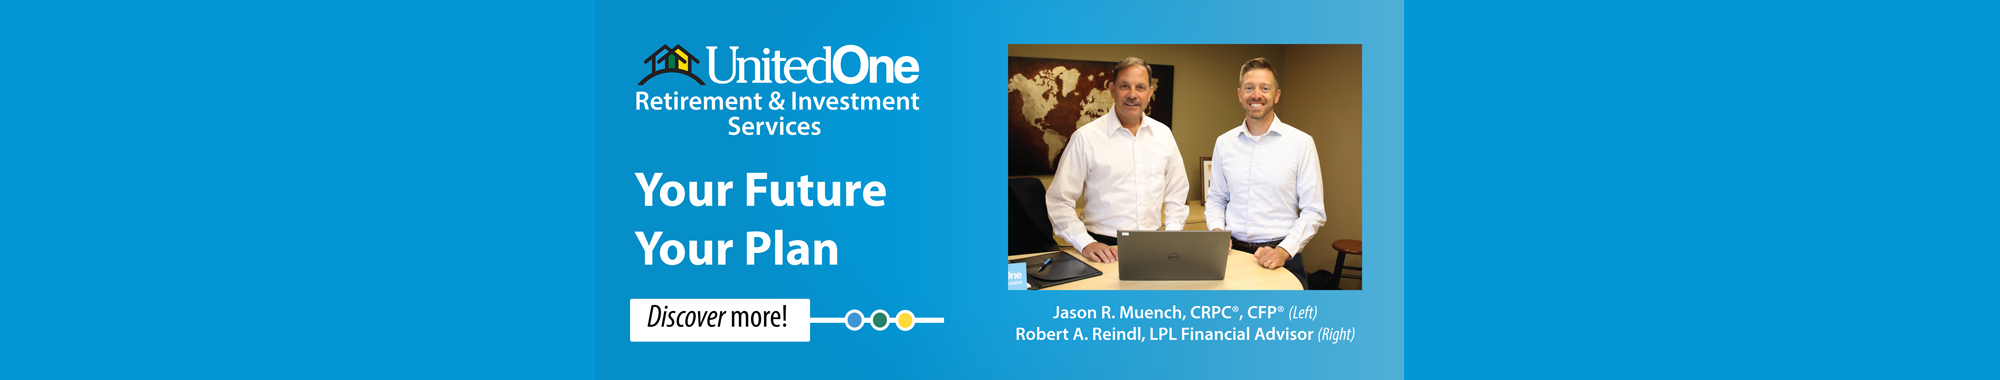 Your Future. Your Plan. UnitedOne Retirement & Investment Services with Jason and Rob. Discover more.